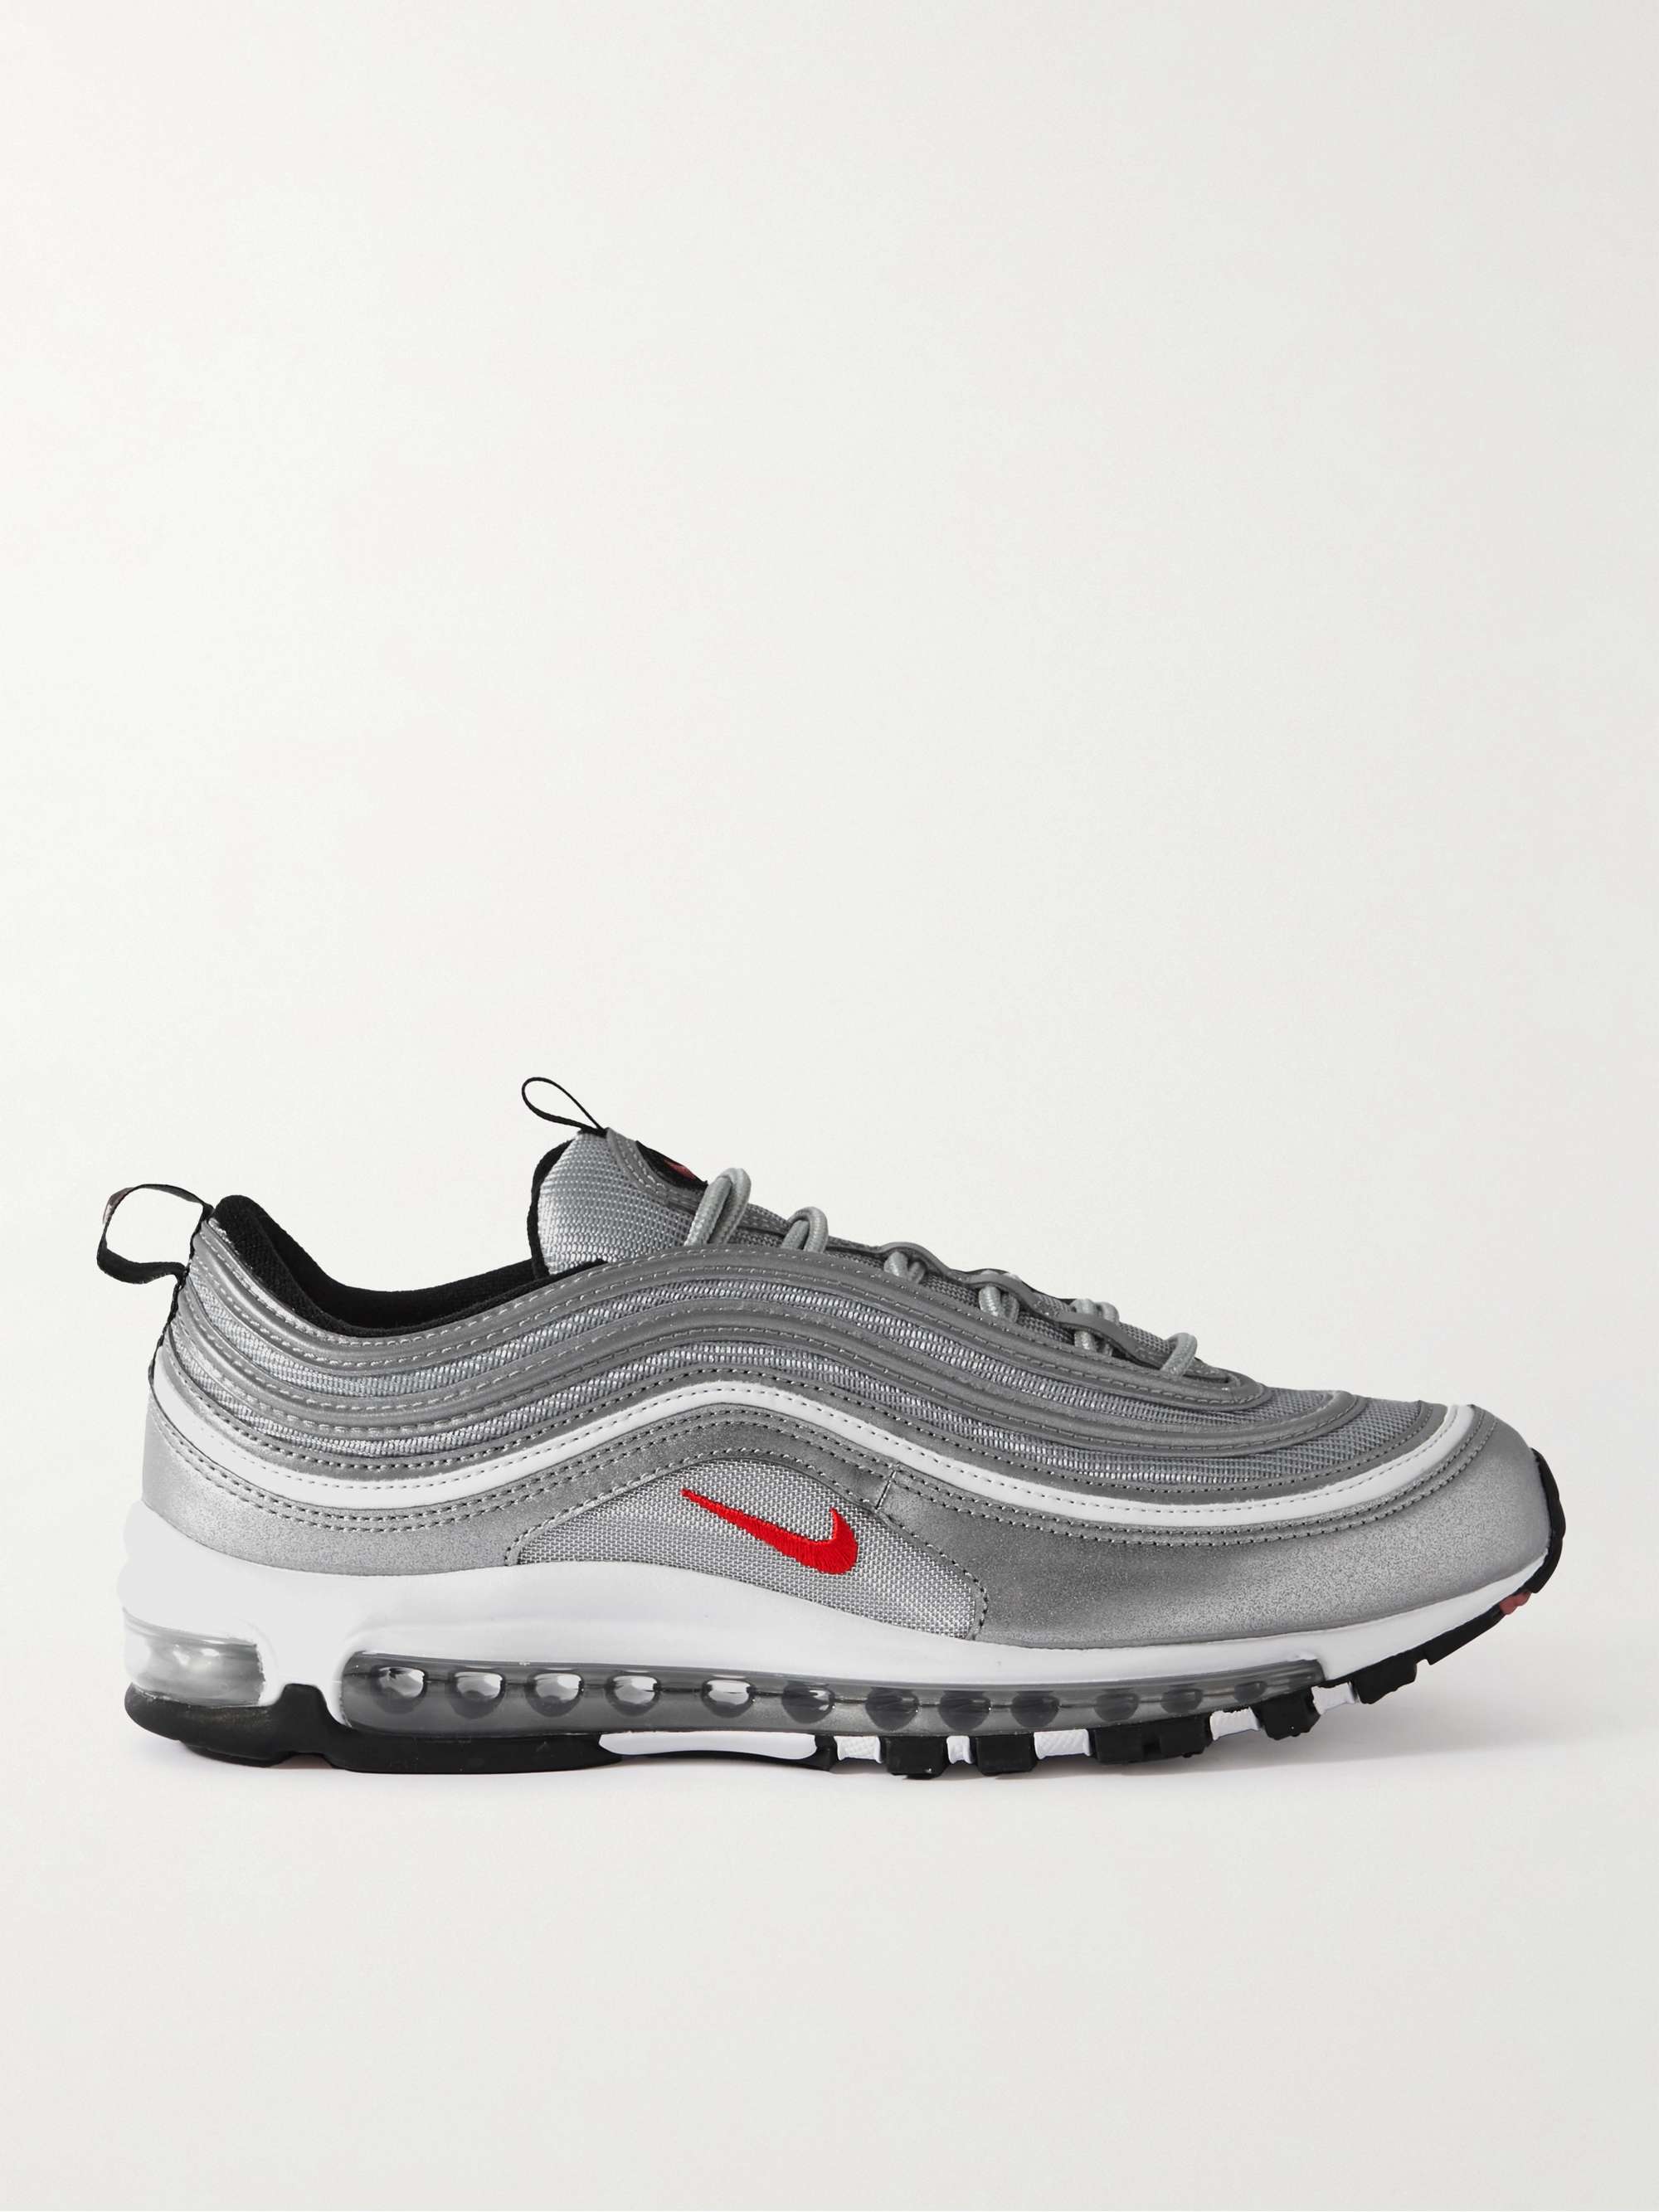 Gray Air Max 97 Metallic Leather and Mesh Sneakers | NIKE | MR PORTER